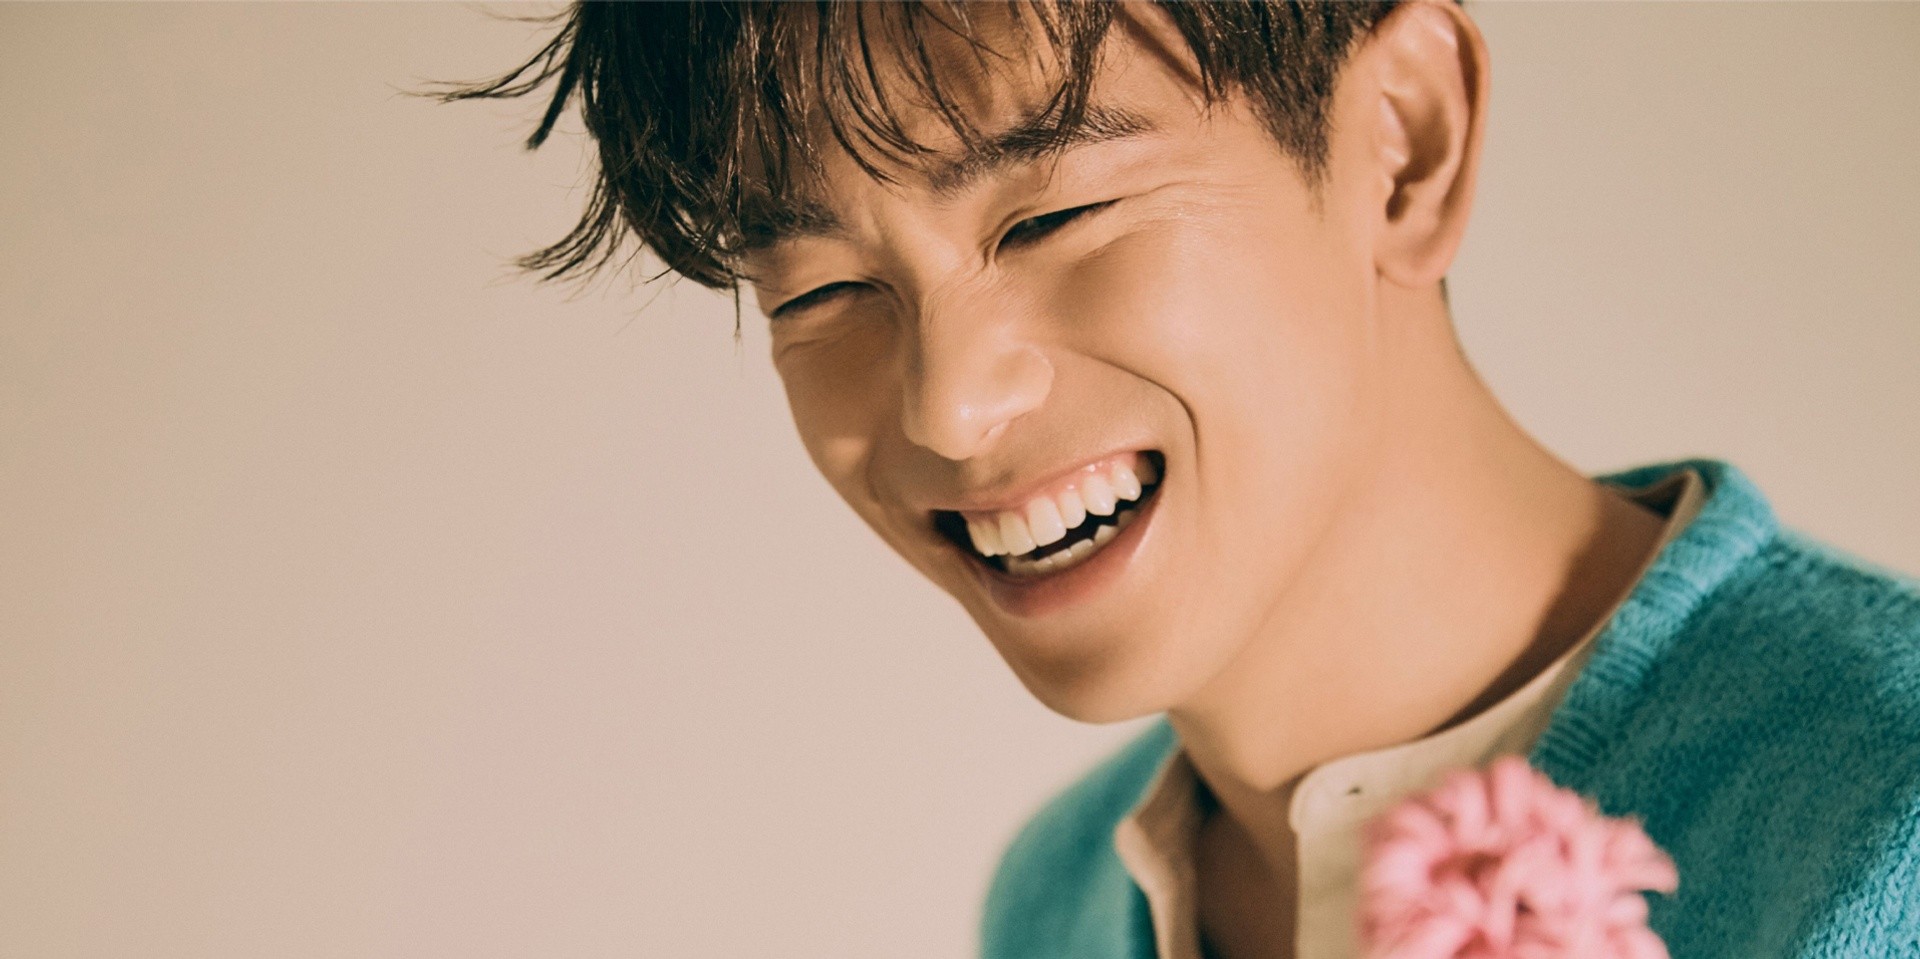 Connect with Eric Nam on his MINDSET audio collection